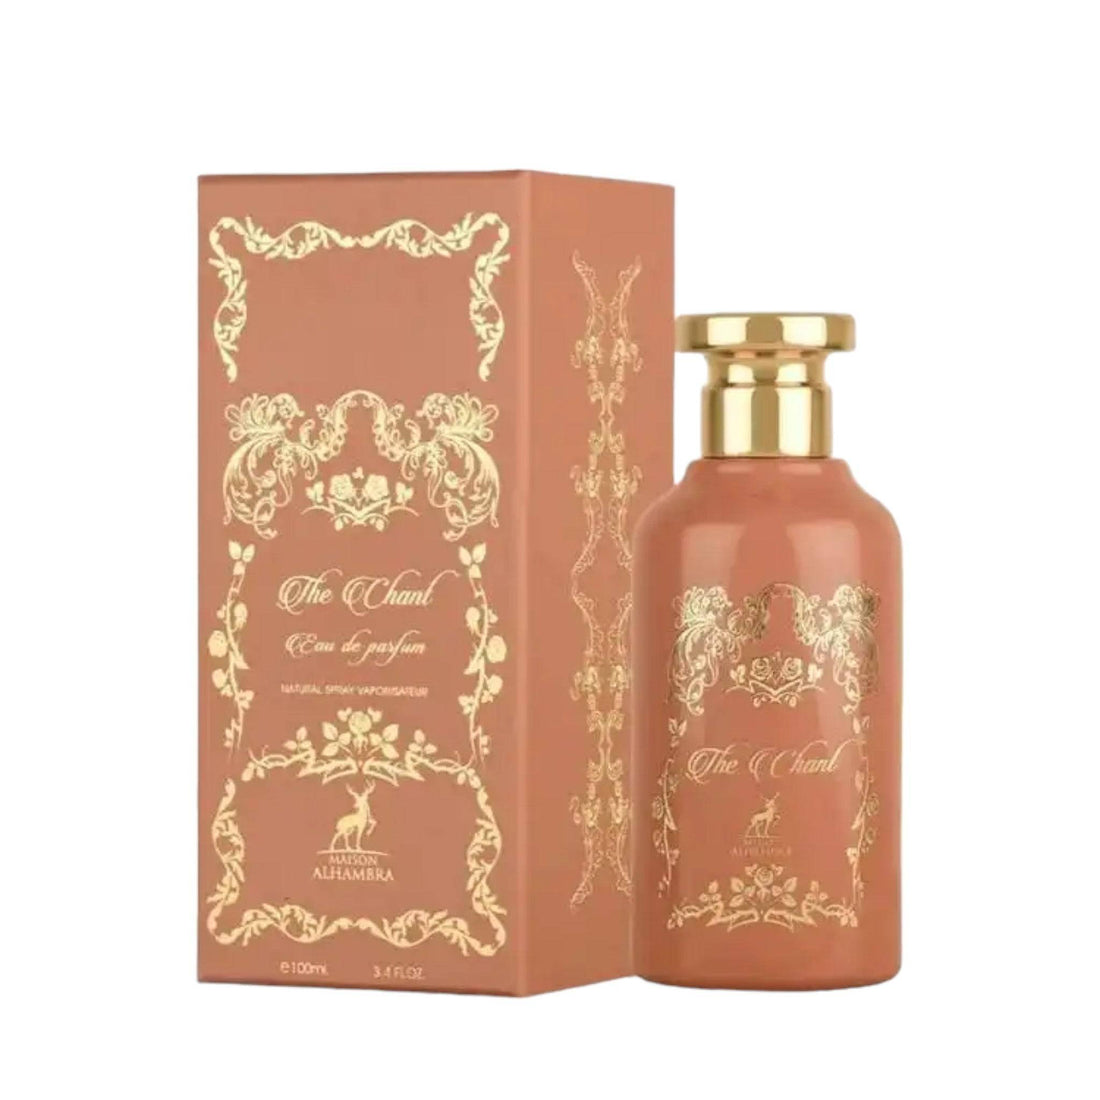 Elegant bottle of Maison Alhambra The Chant perfume, showcasing the luxurious frangipani scent, set against a backdrop of a mystical tropical forest.